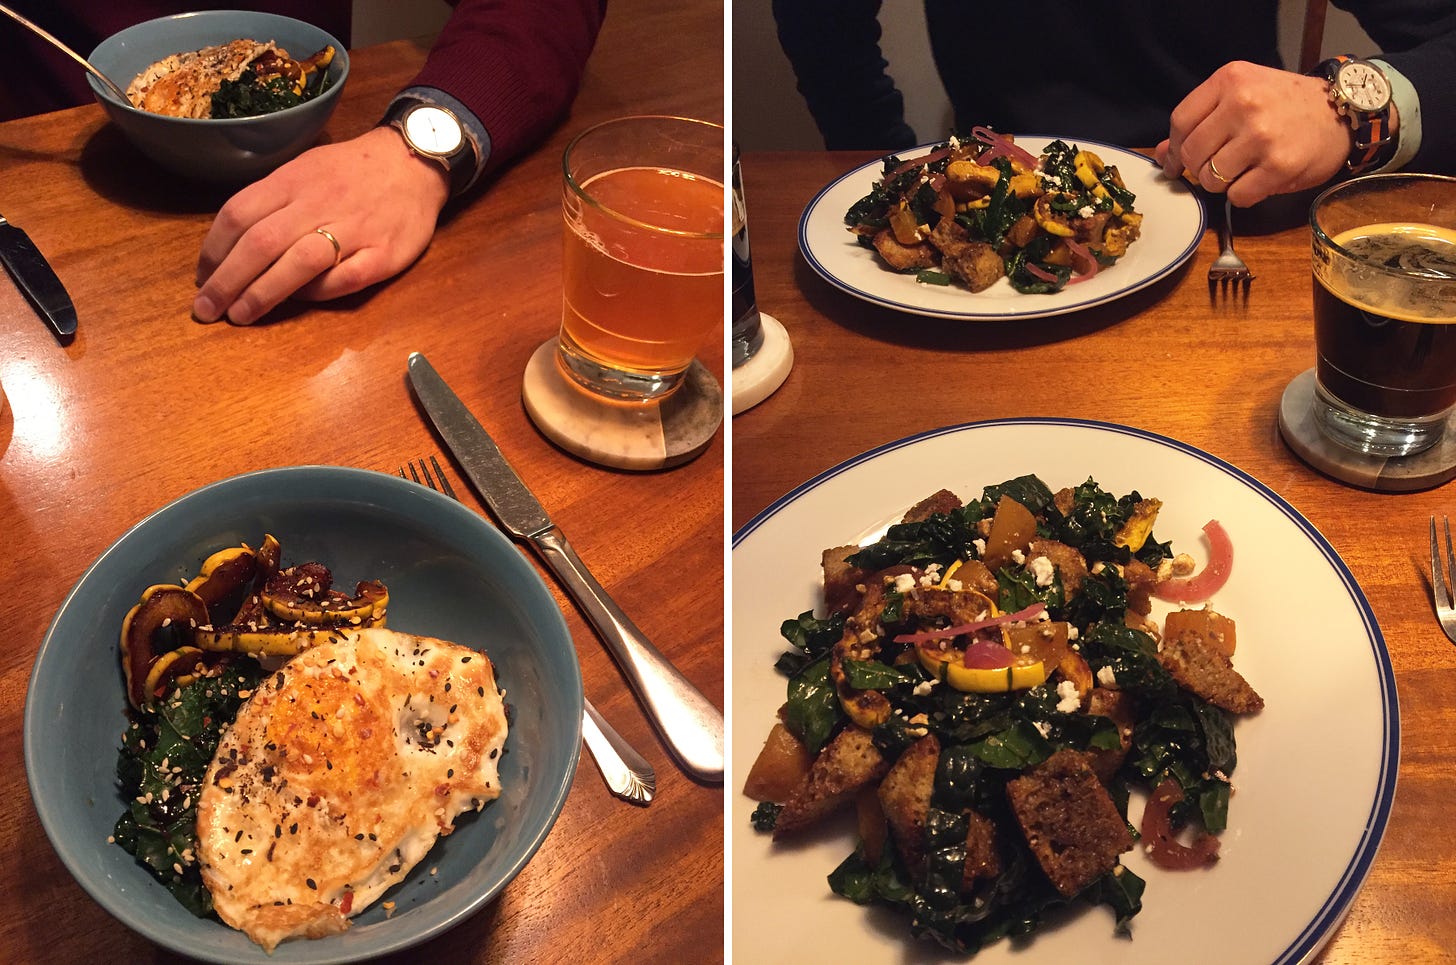 left image: a blue bowl with a fried egg, braised kale, and squash in hoisin sauce. Next to it is a glass of beer, and Jeff's hand rests on the table across. Right image: two white plates of kale panzanella with beets, squash, and red onions visible throughout. A glass of dark beer rests on a coaster next to the plate in the foreground.